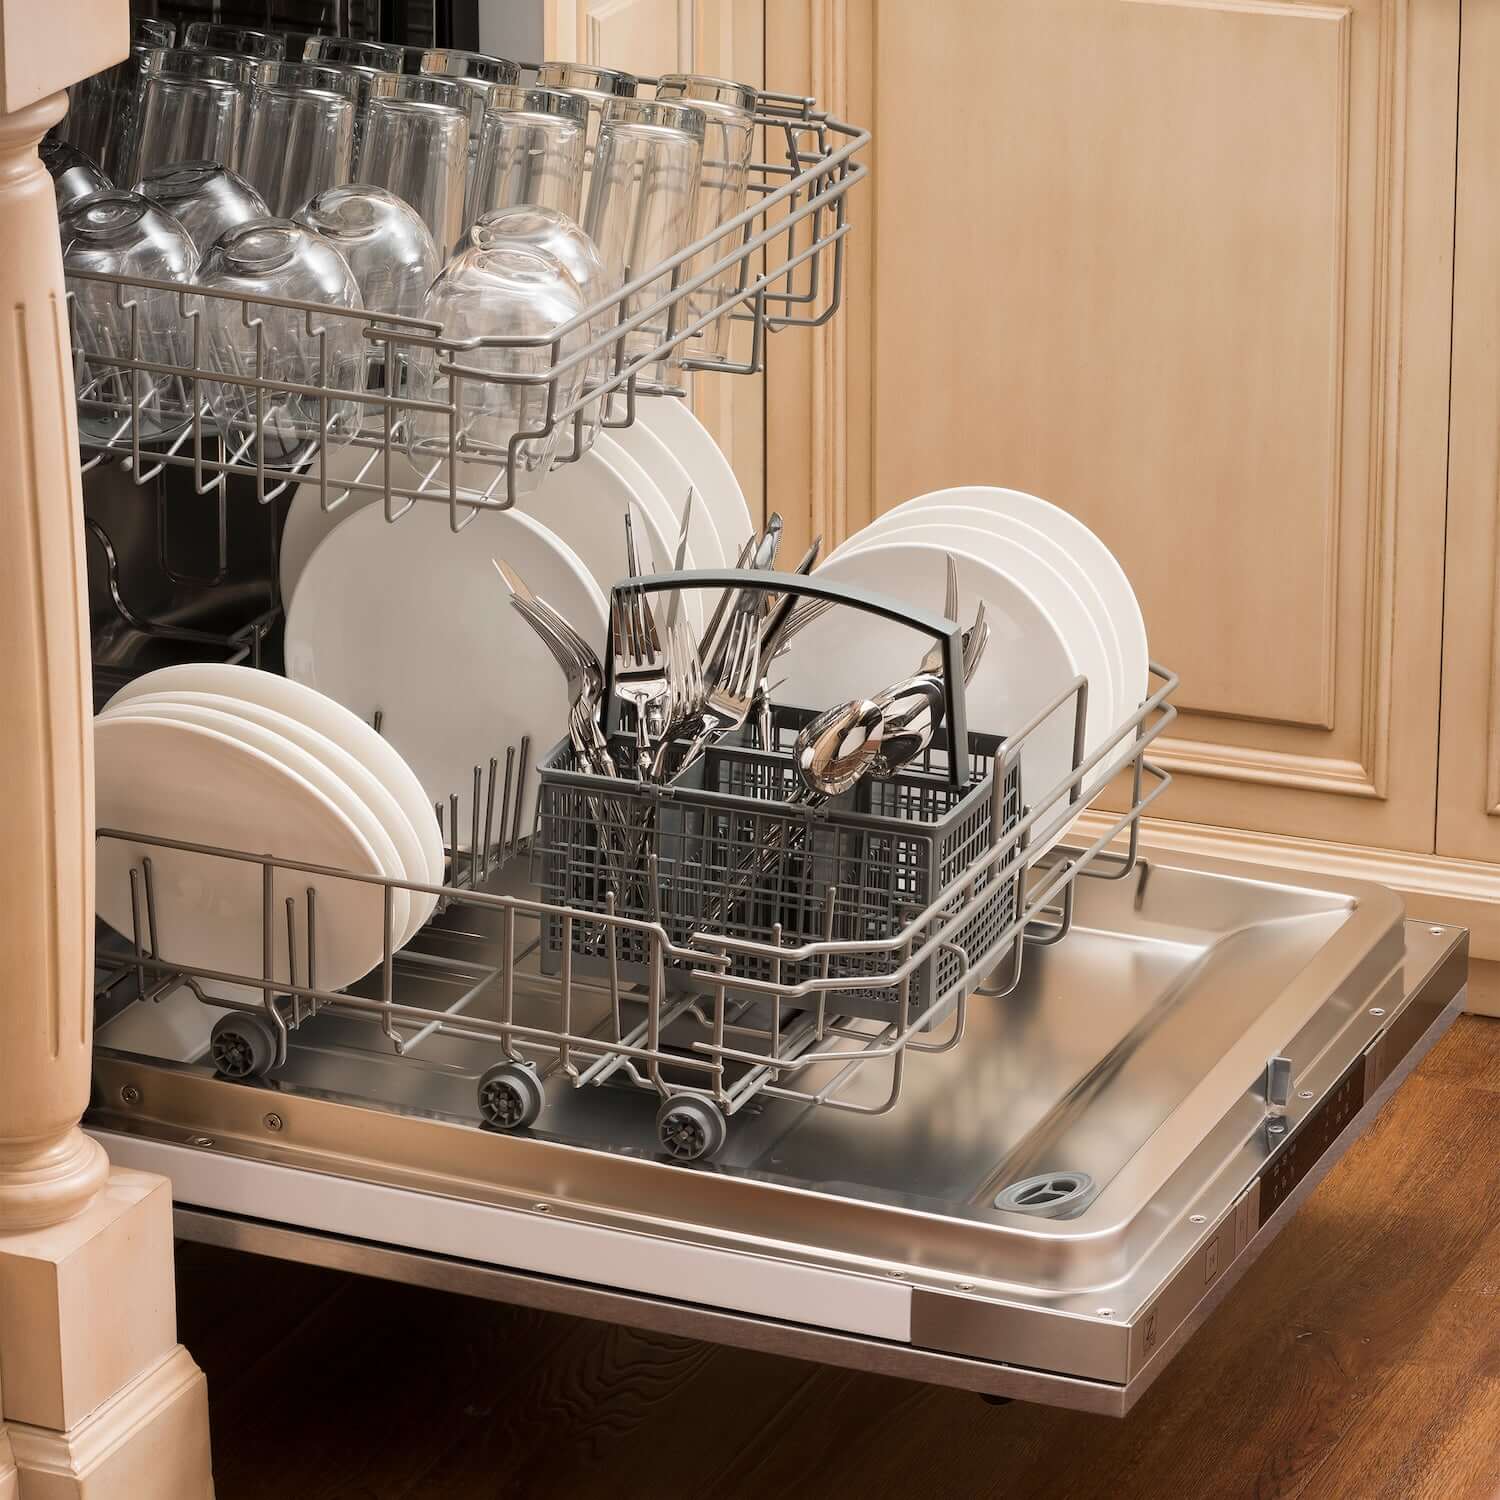 ZLINE dishwasher loaded with dishes.